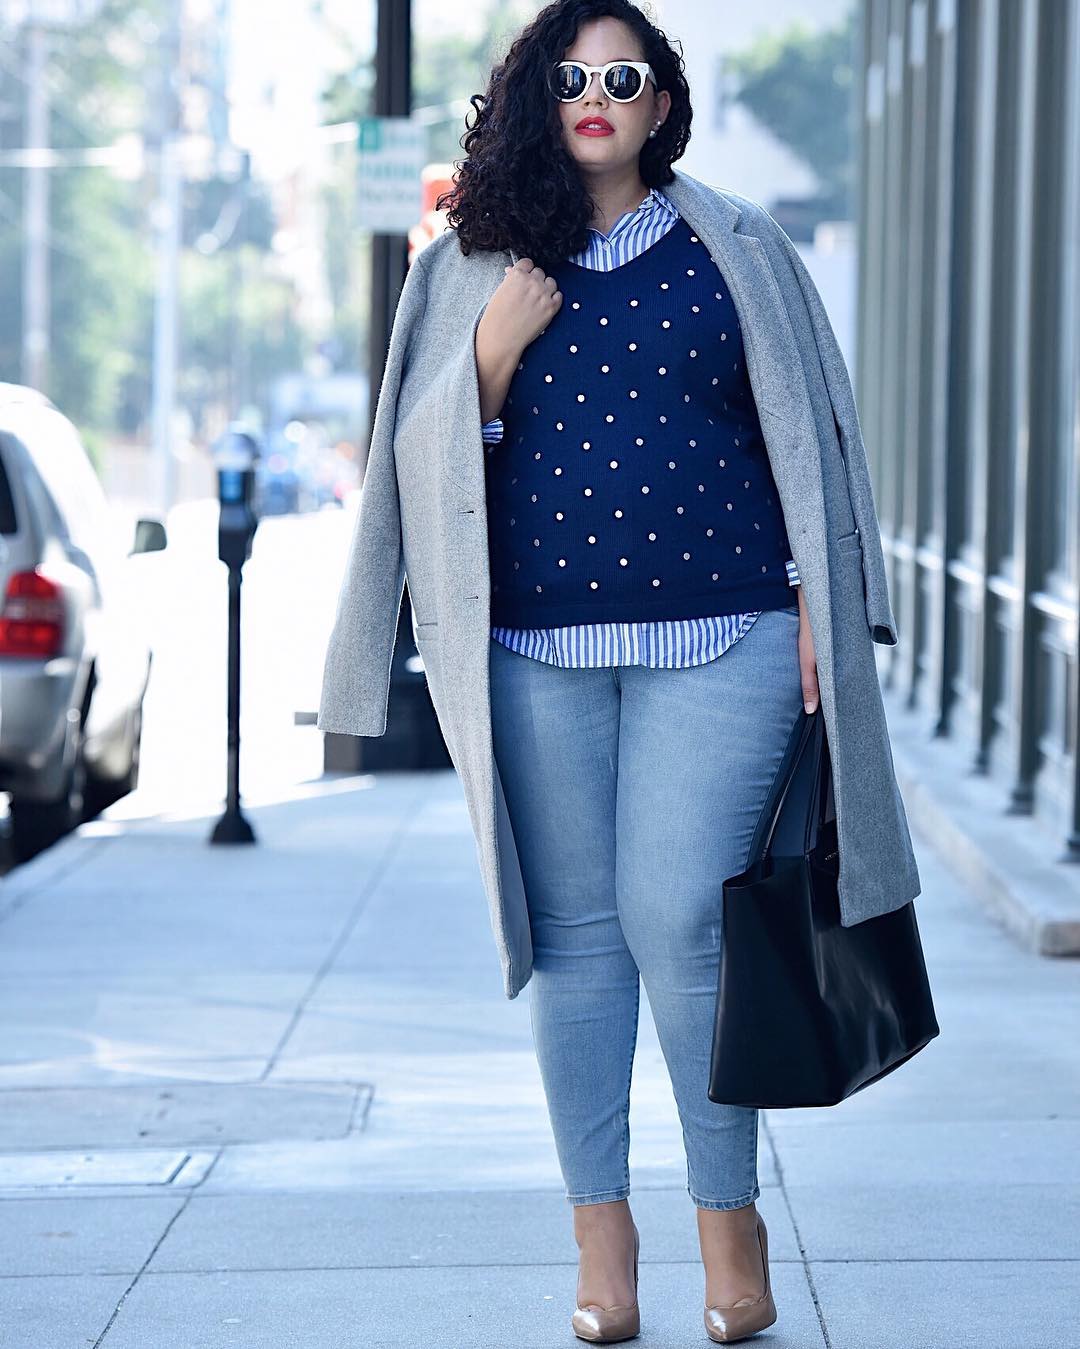 2 Plus Size Stylists Must-Haves for the Fall Season